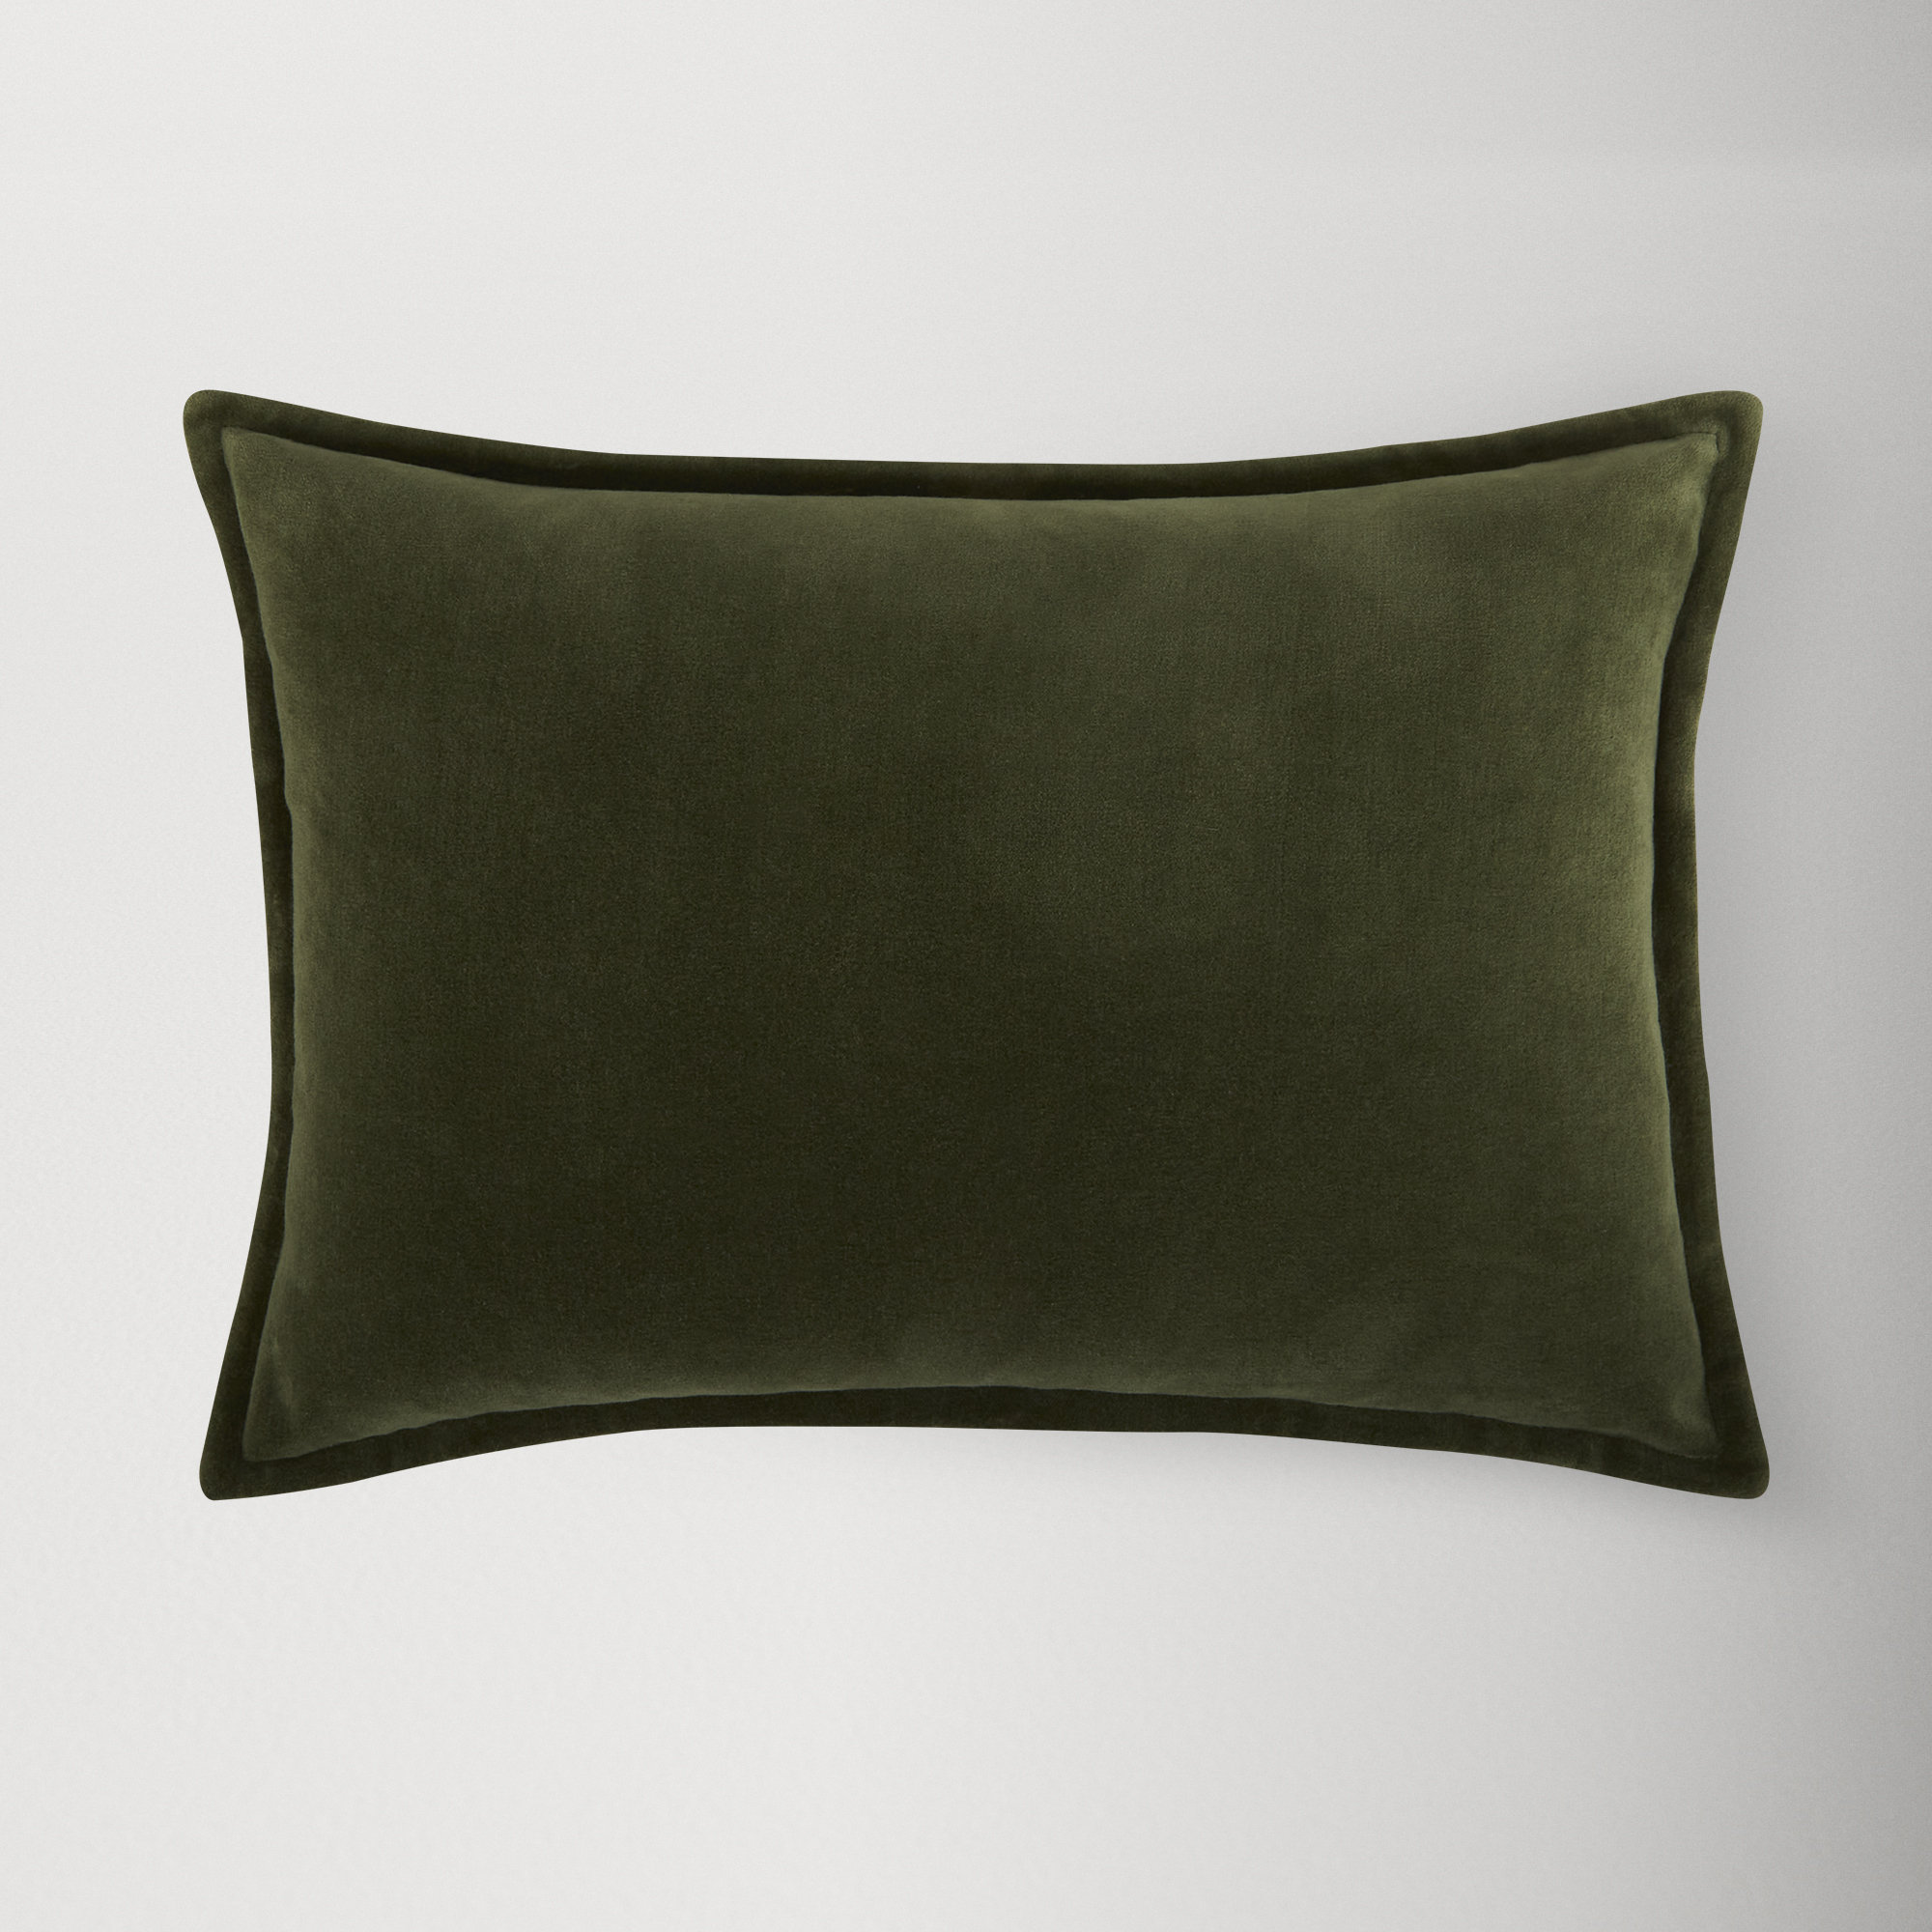 3 Throw Pillow Cover Set, Tufted 20 X 20 Boho Pillows, Decorative Mud Cloth  Lumbar Cover, 16 X 16 Olive Green Covers 